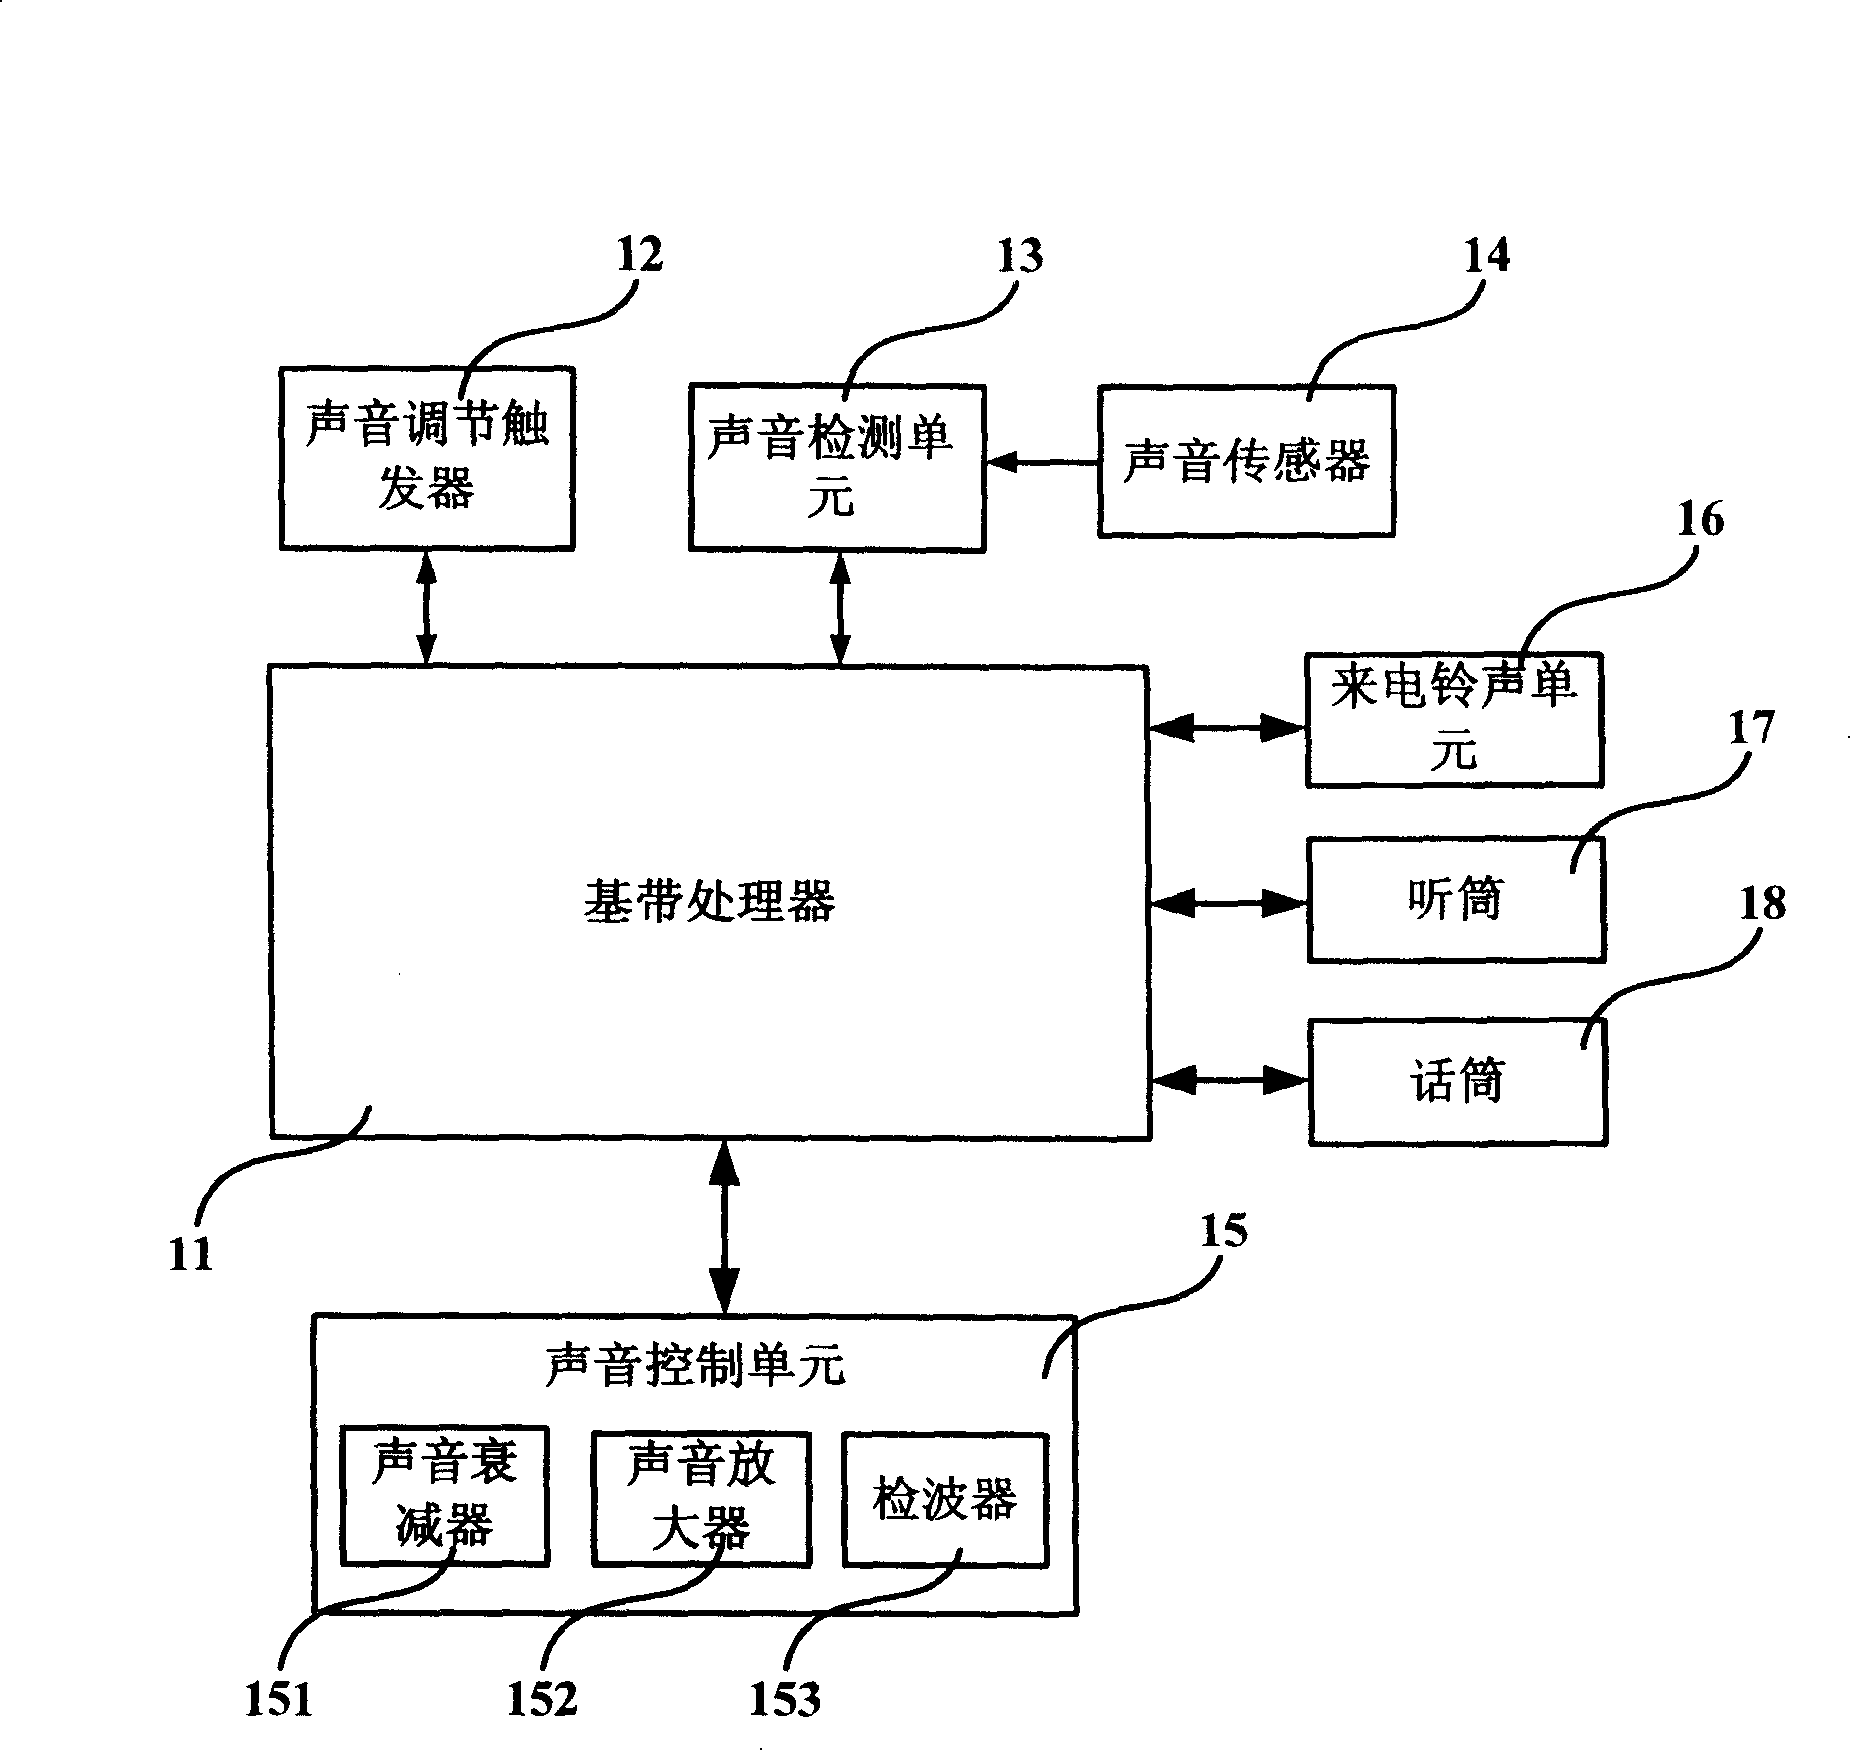 Apparatus and method for self-adapting sound volume regulation of mobile phone